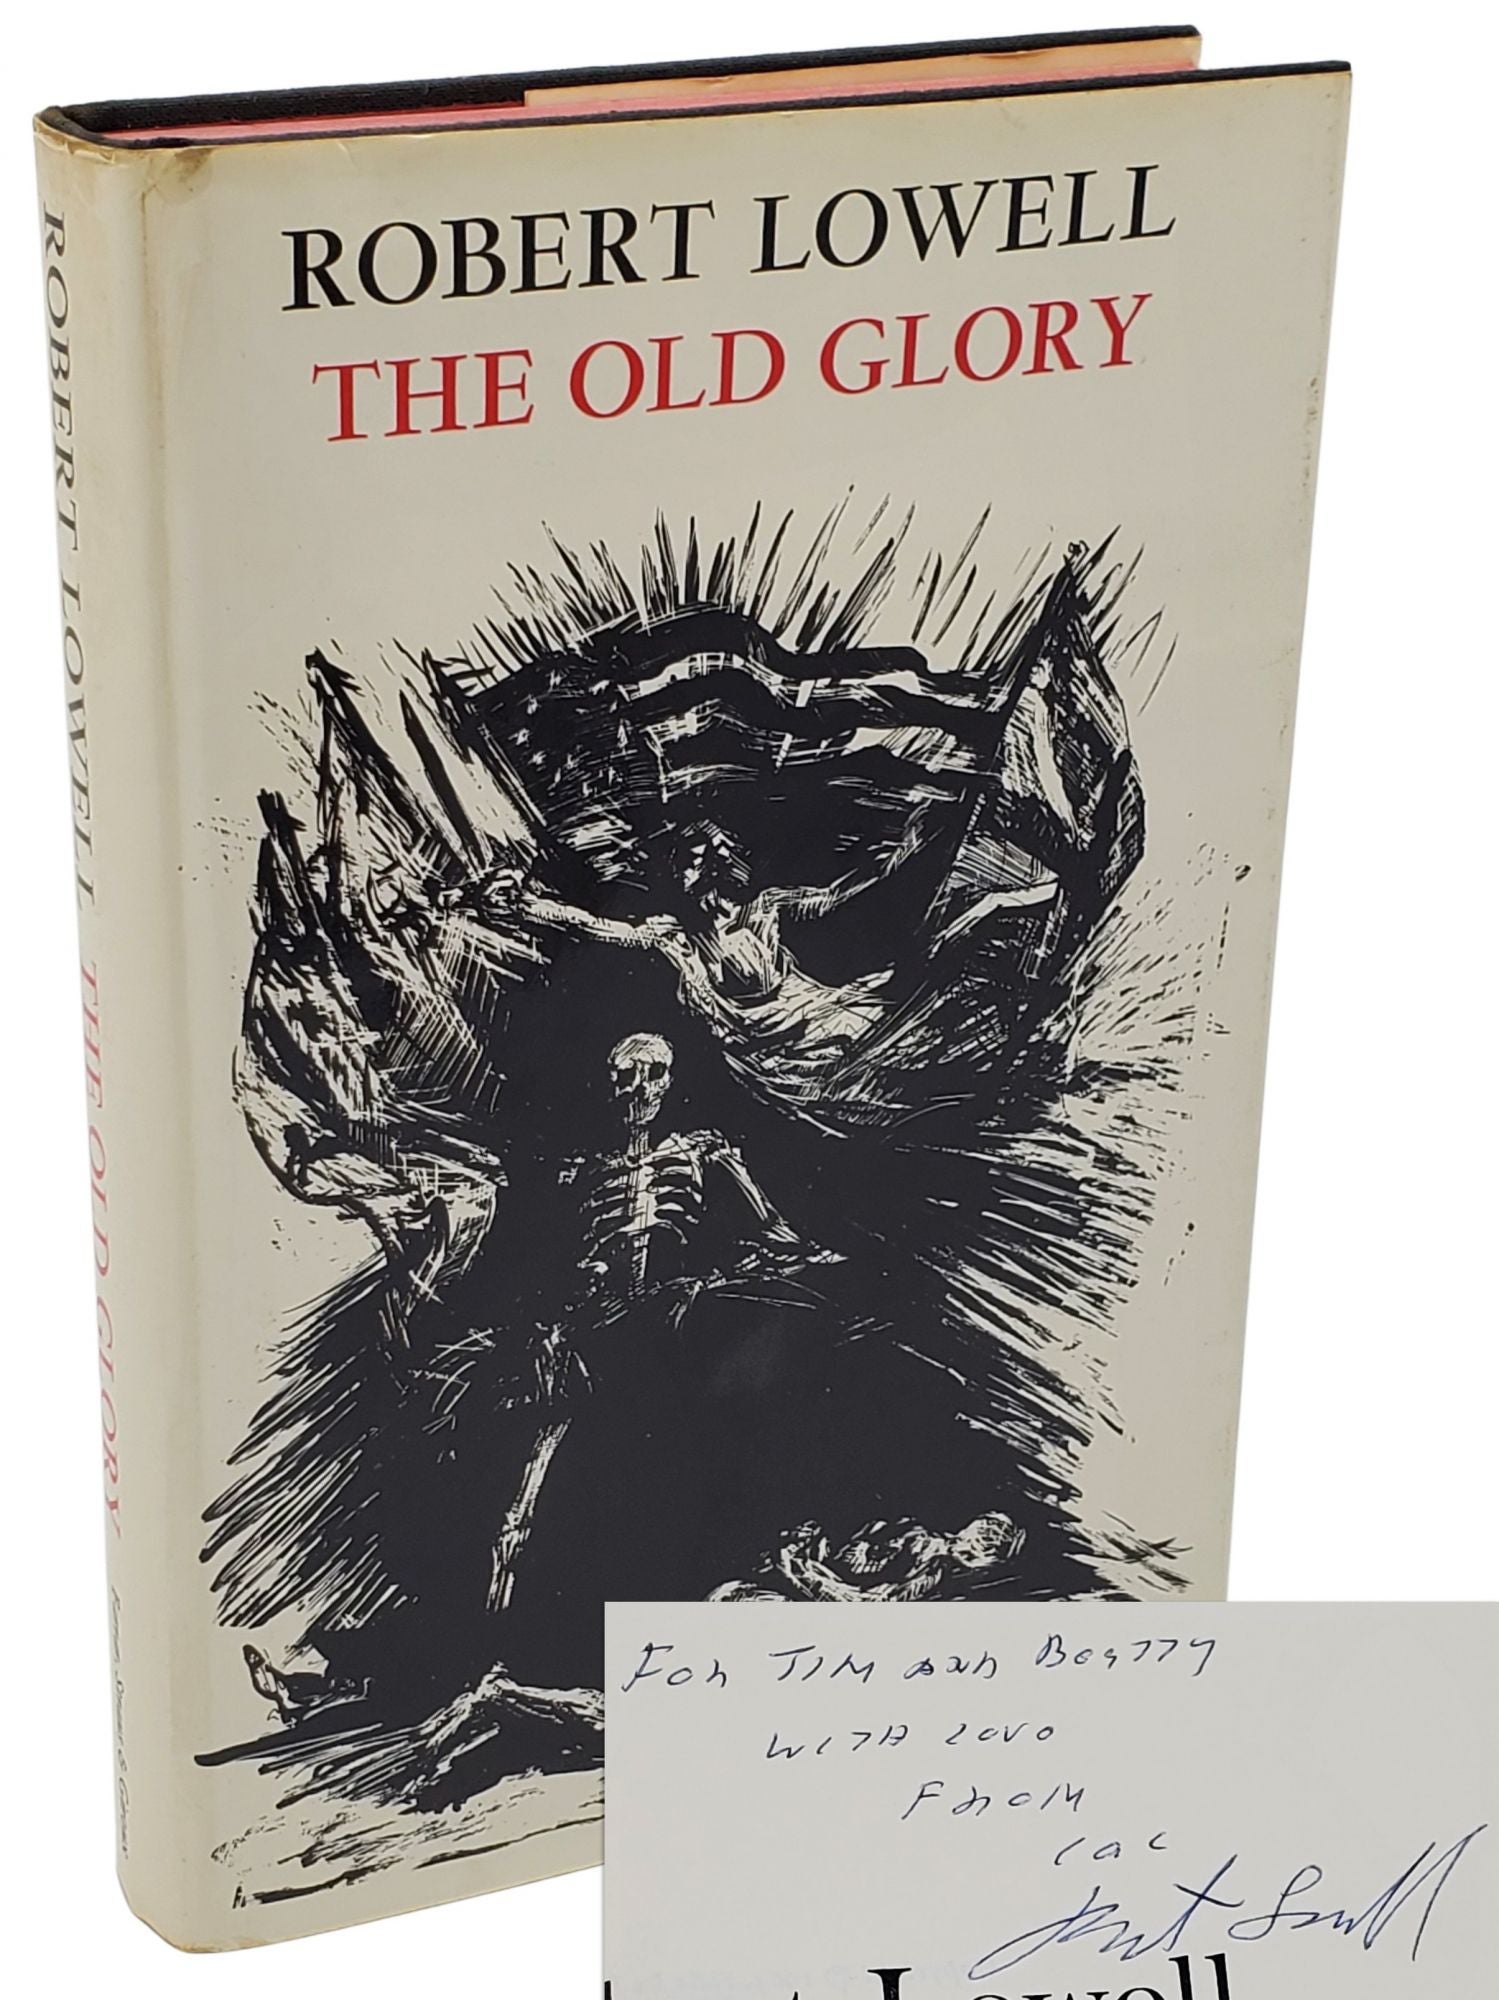 [Book #29400] THE OLD GLORY [SIGNED ASSOCATION COPY]. Robert Lowell.